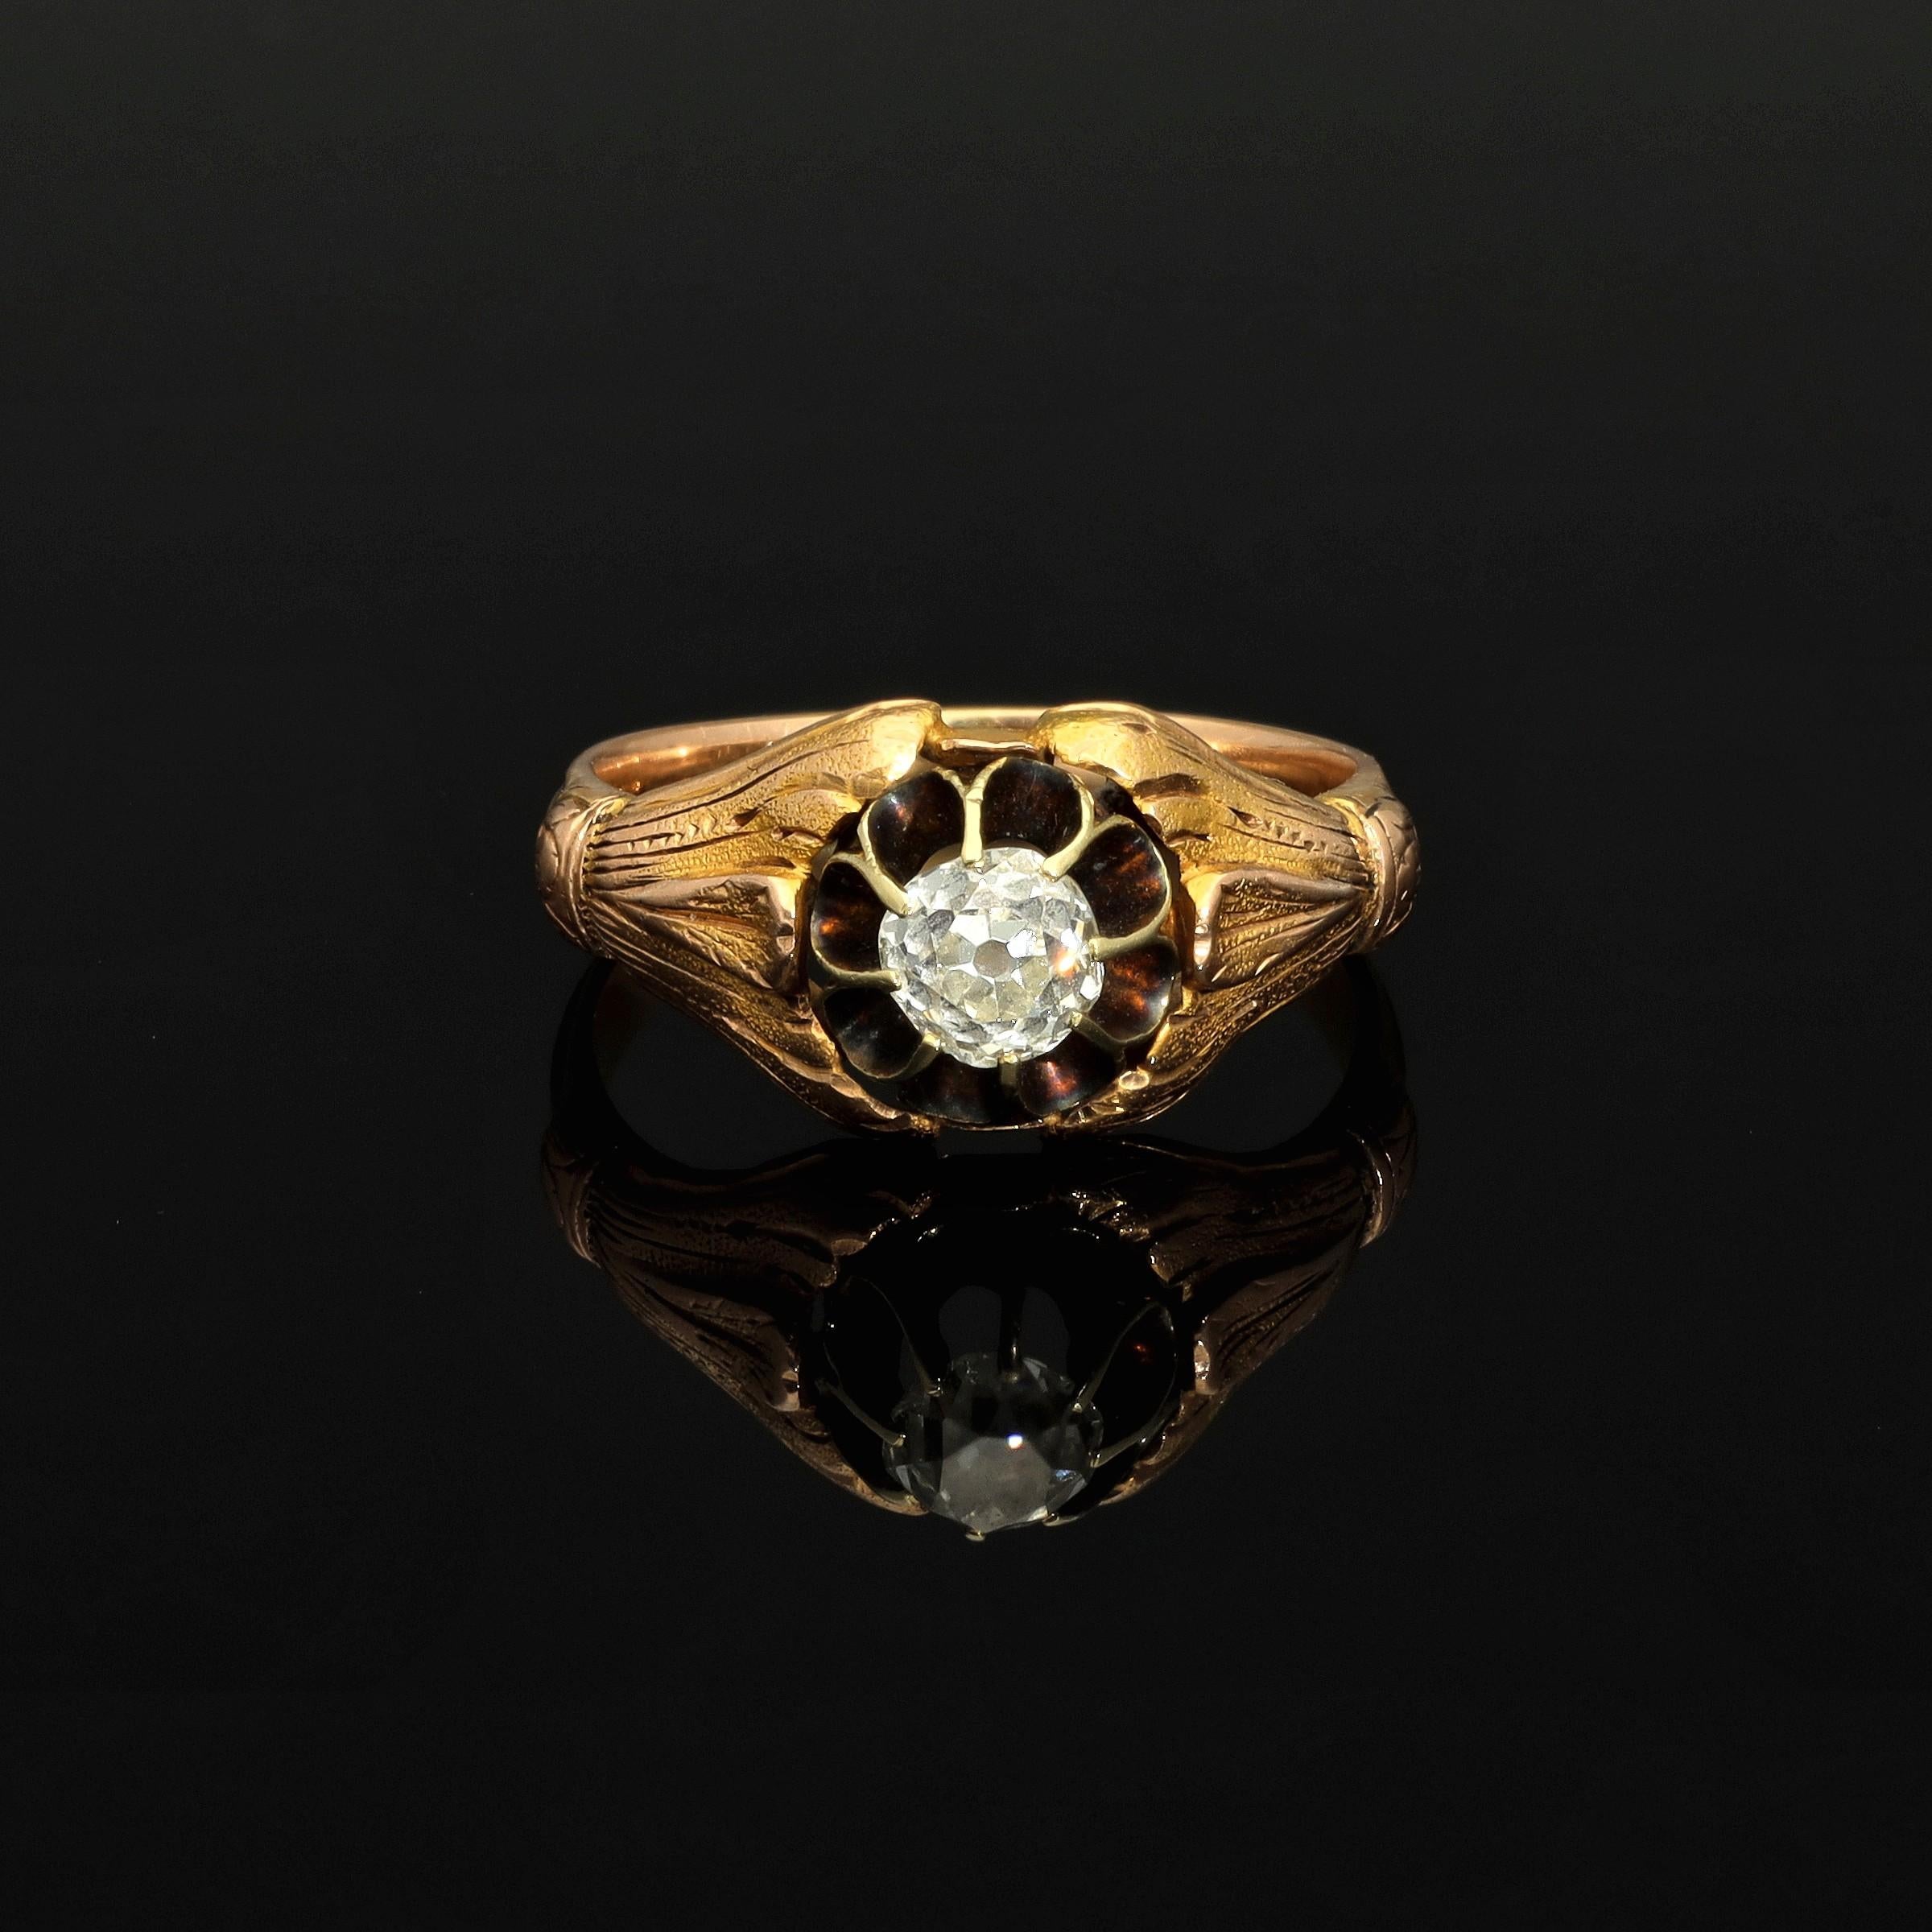 An amazingly preserved mid-late 19th century ring hand-crafted in 18k gold. This stuning unisex ring dates to the years 1800's and presumably comes from France. 

Boasting a highly elevated belcher style prongs, the crown carries a chunky natural